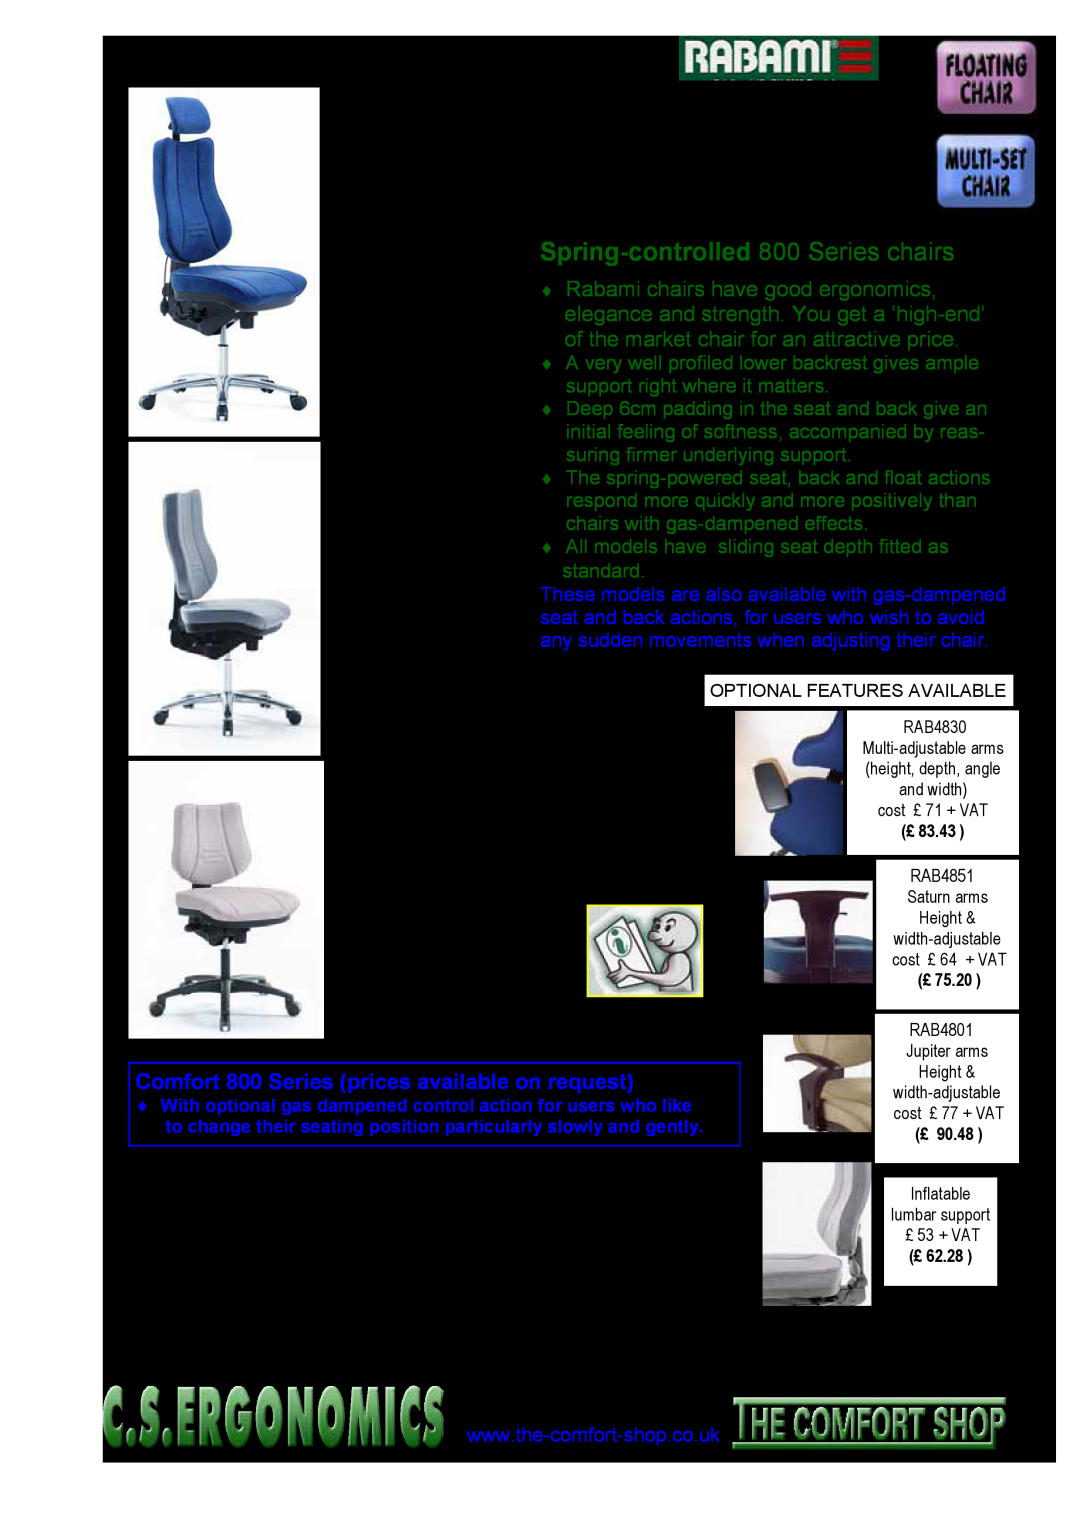 Fellowes RH 300 manual Rabami chairs Comfort 800 Series, With spring-controlledactions, Spring-controlled 800 Series chairs 